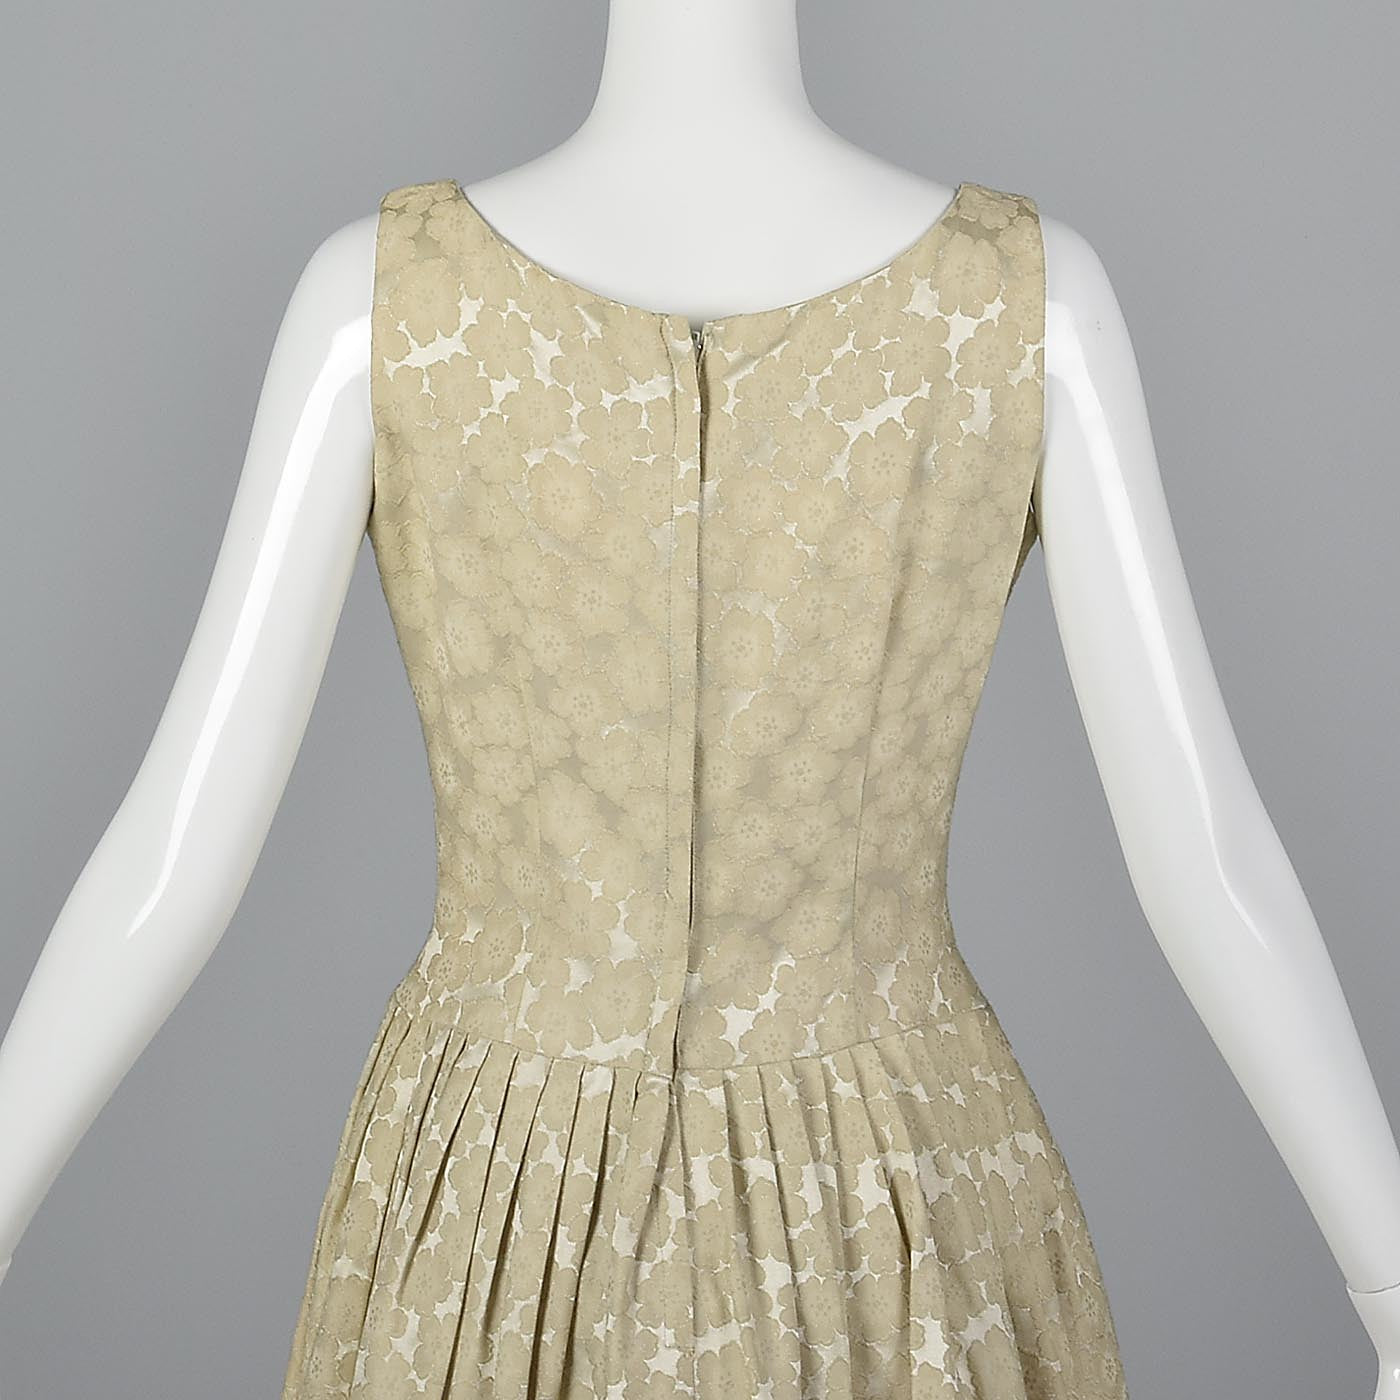 1950s Ivory Brocade Dress with Corset Illusion Front